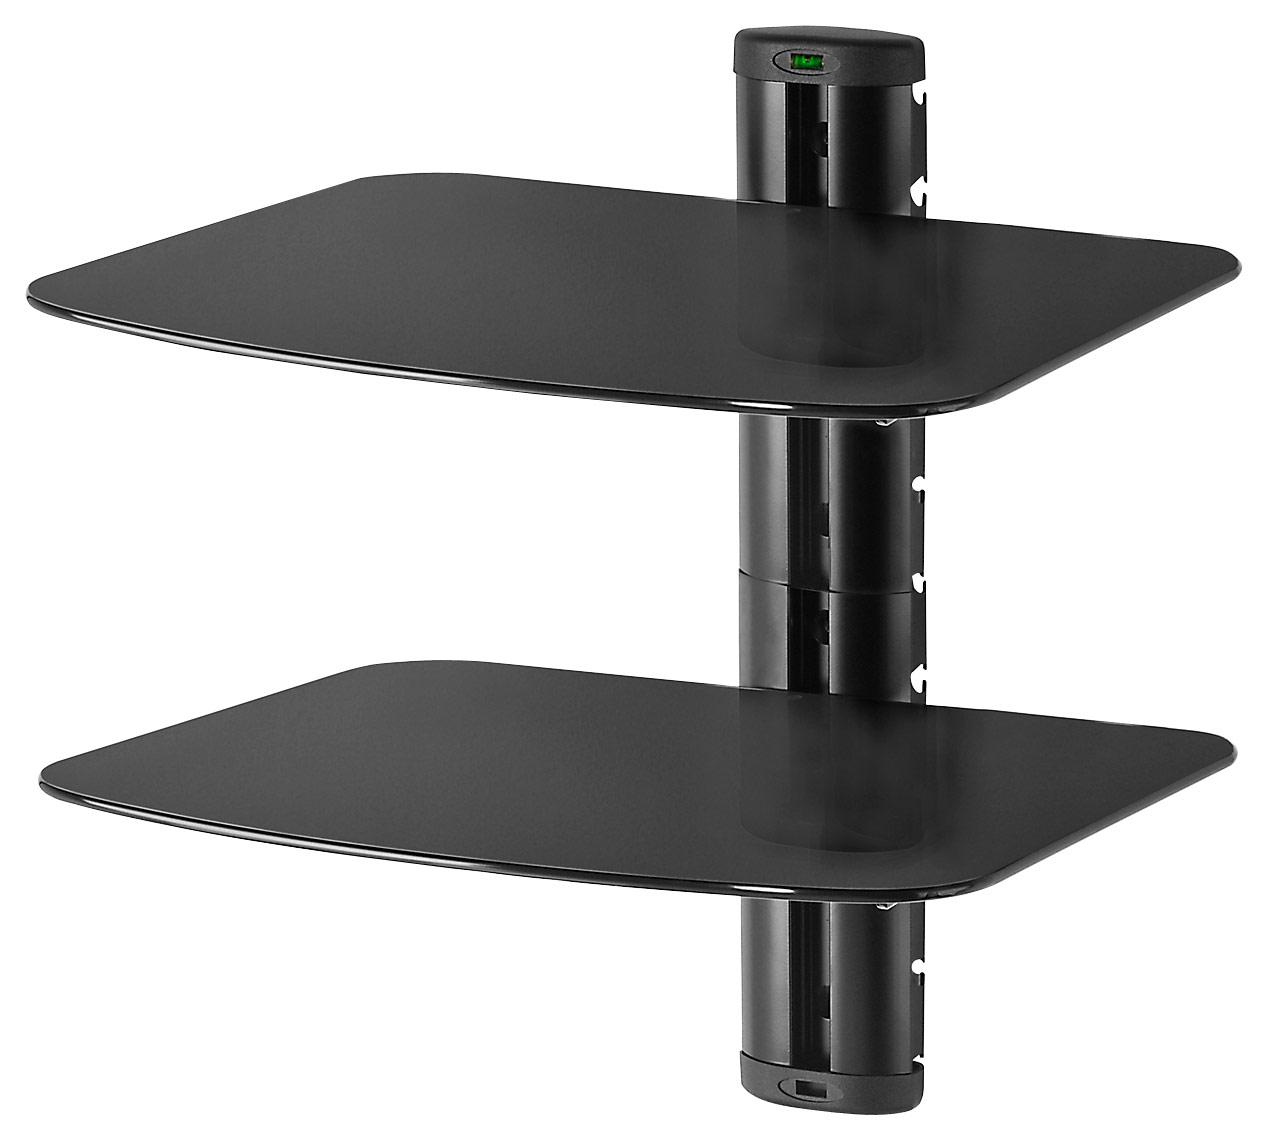 Peerless-AV - Mounting Shelf Compatible with Home Theater System, DVD/Blu-ray Player - Black